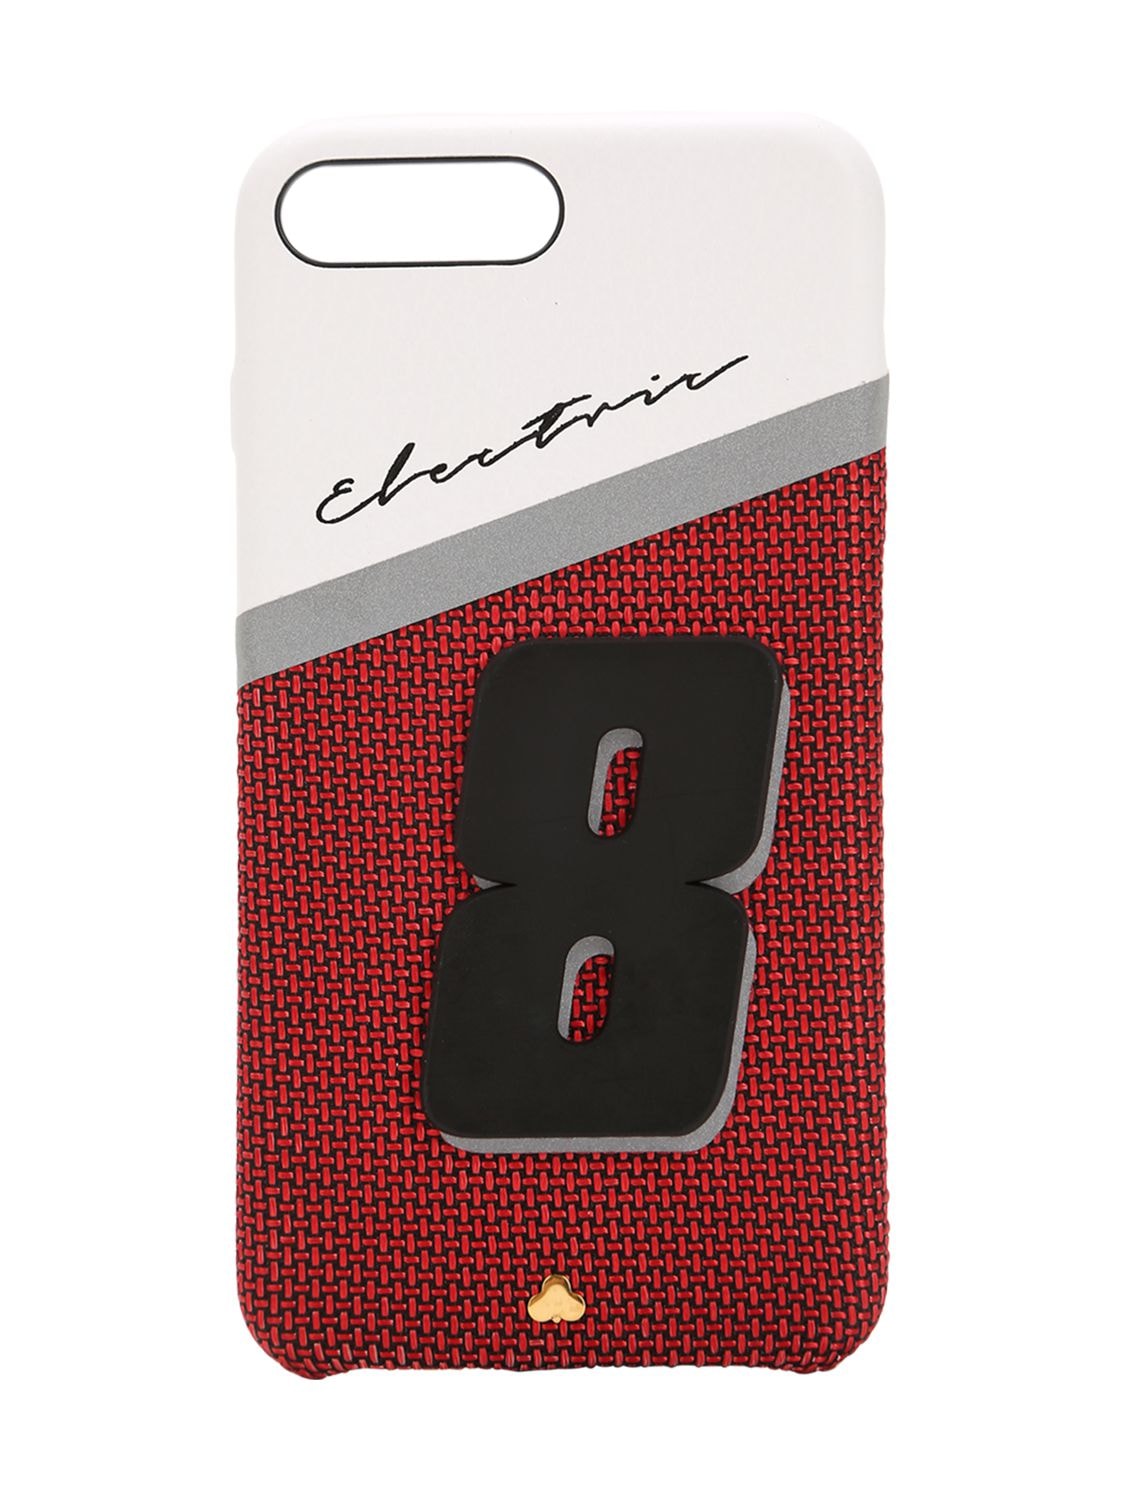 Chaos Electric 8 Leather Iphone 7/8 Plus Cover In Red